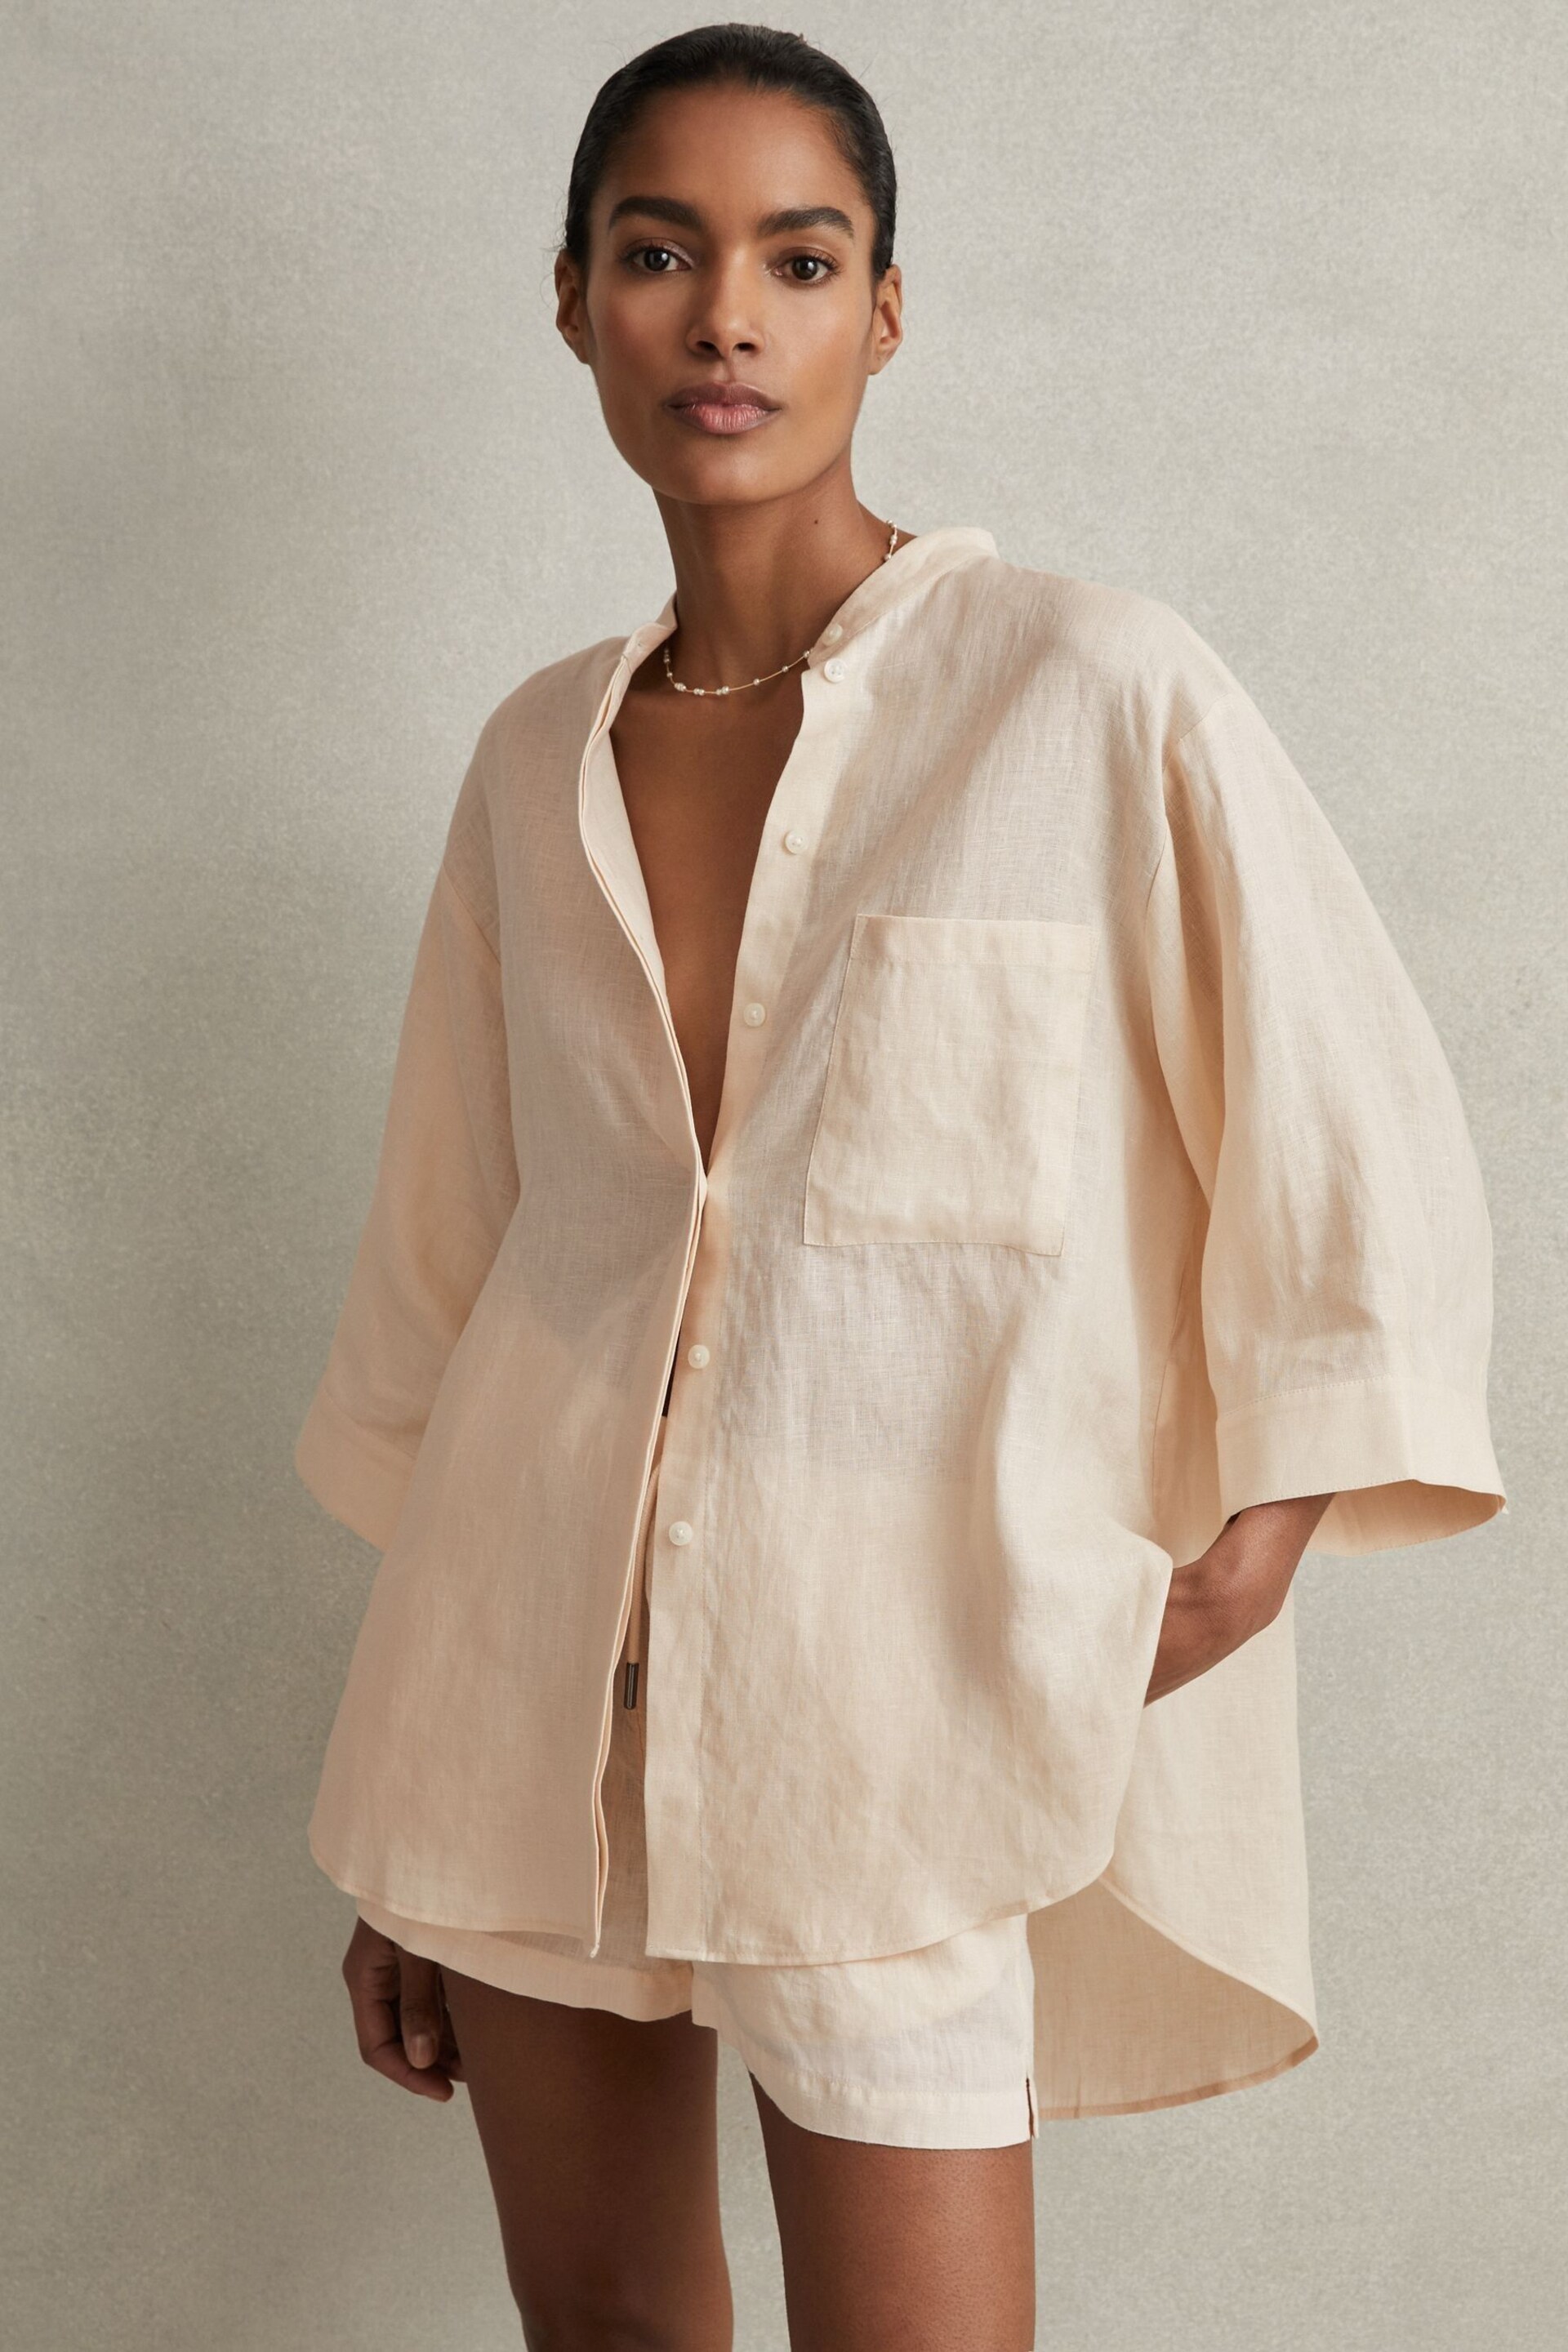 Reiss Blush Winona Relaxed Sleeve Linen Shirt - Image 1 of 6